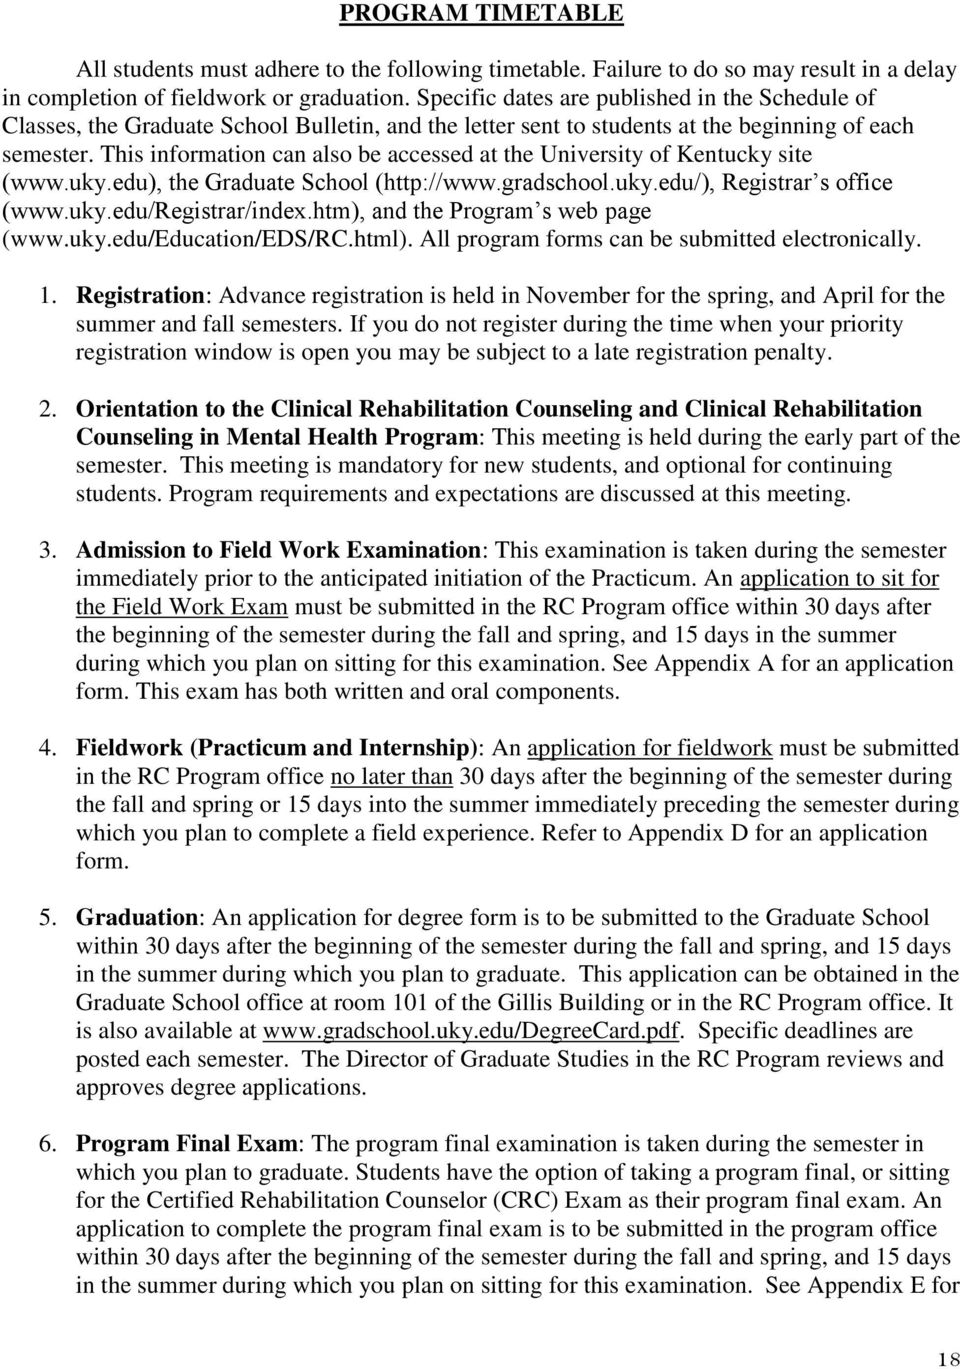 This information can also be accessed at the University of Kentucky site (www.uky.edu), the Graduate School (http://www.gradschool.uky.edu/), Registrar s office (www.uky.edu/registrar/index.